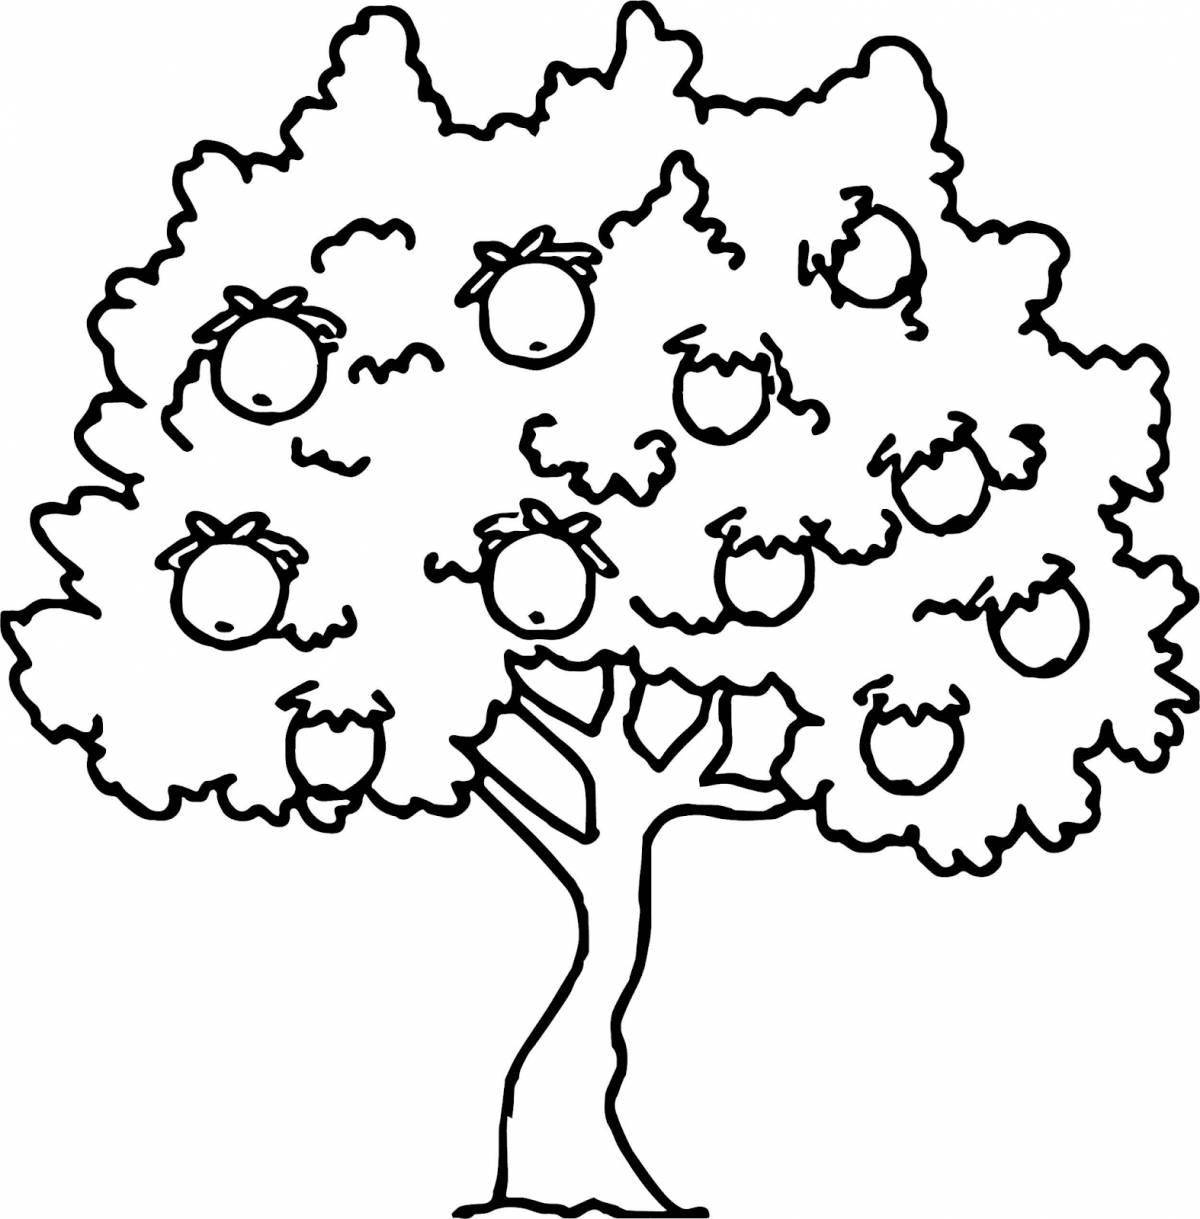 Bright apple tree with apples for children